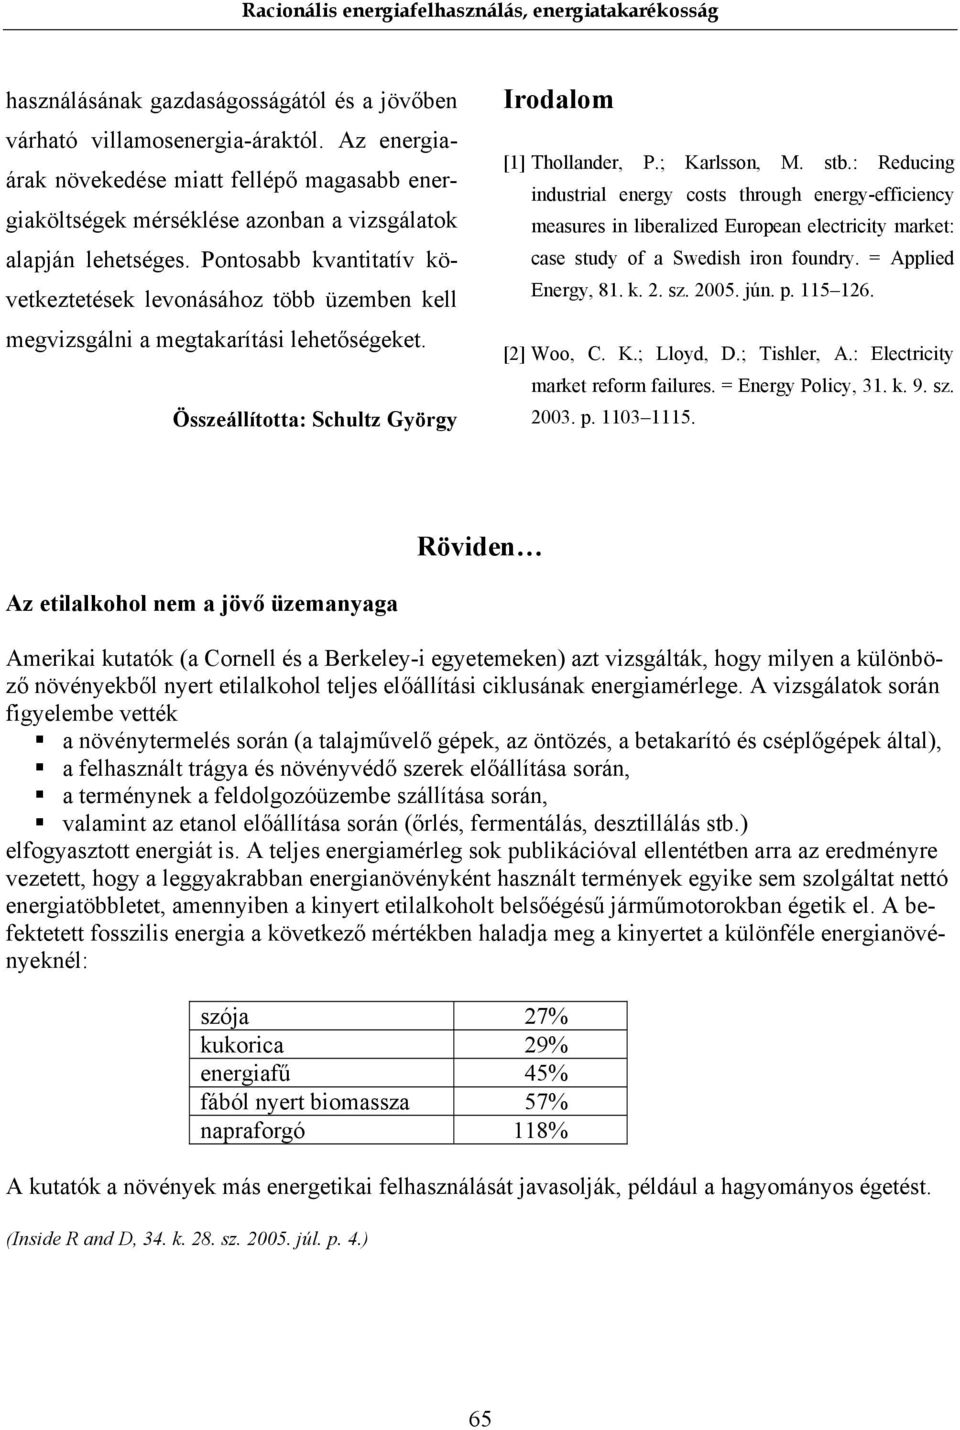 : Reducing industrial energy costs through energy-efficiency measures in liberalized European electricity market: case study of a Swedish iron foundry. = Applied Energy, 81. k. 2. sz. 2005. jún. p.